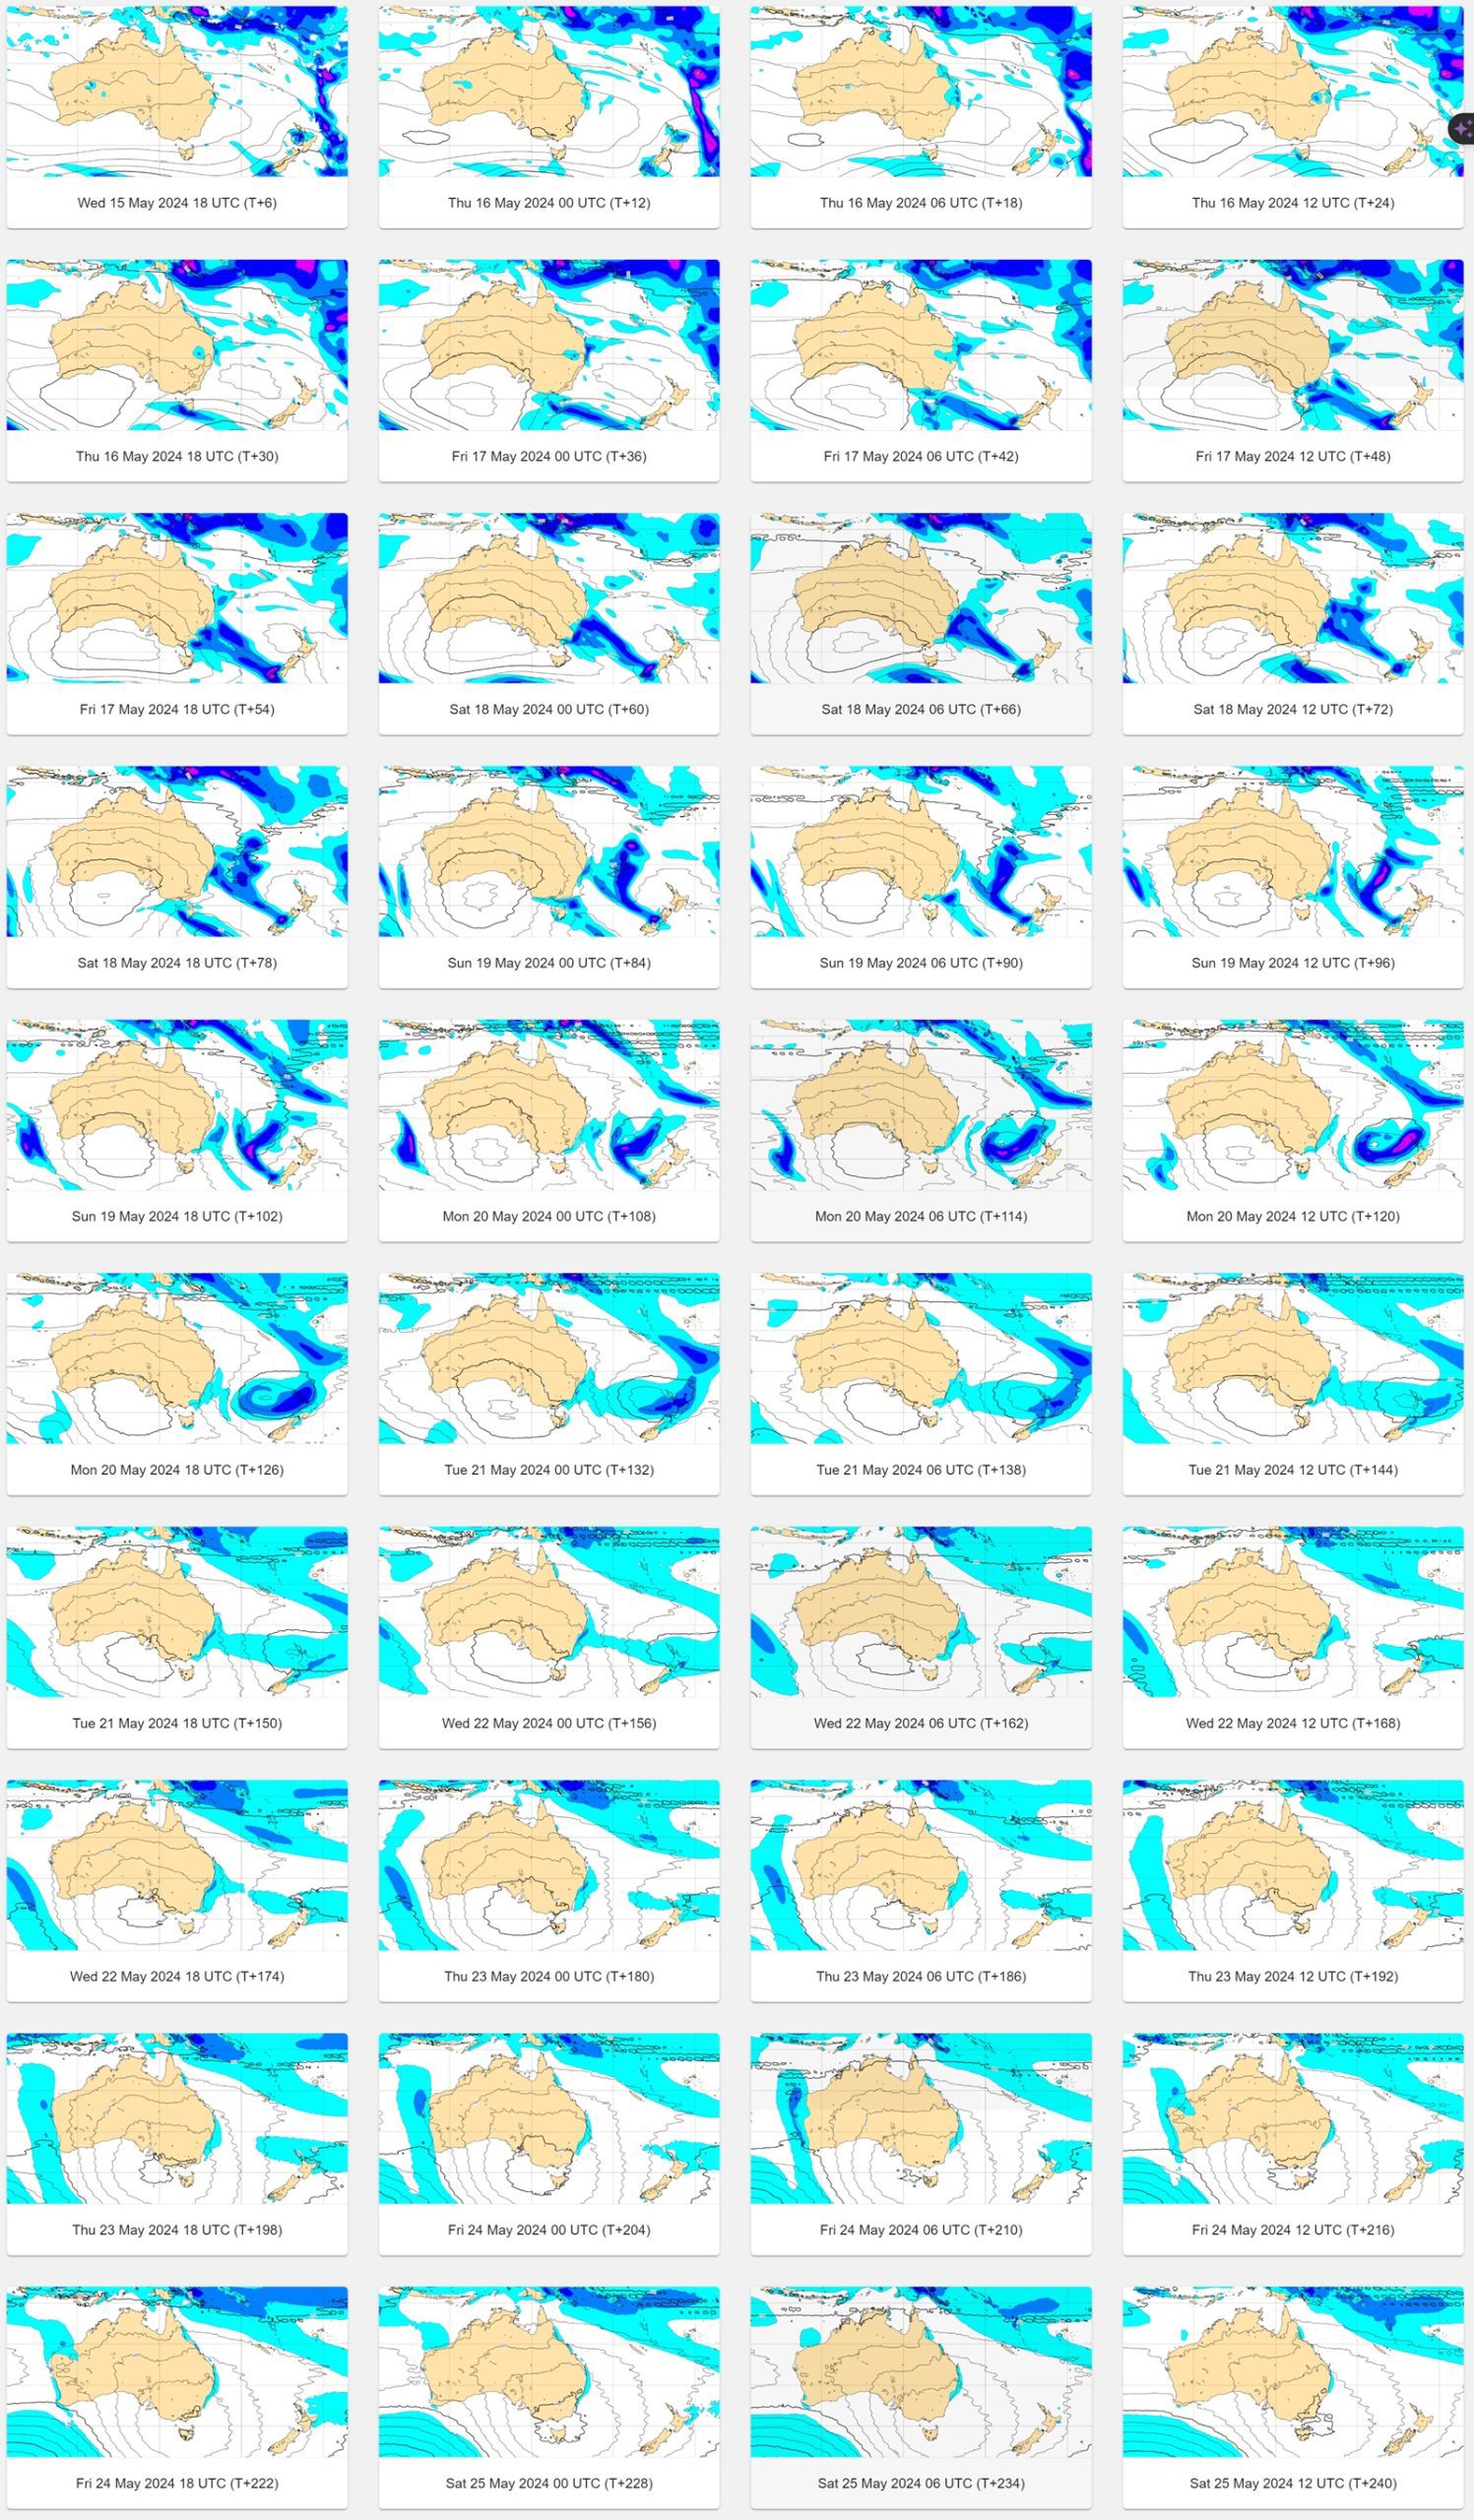 Qld & nsw 7 day rainfall forecasts 5